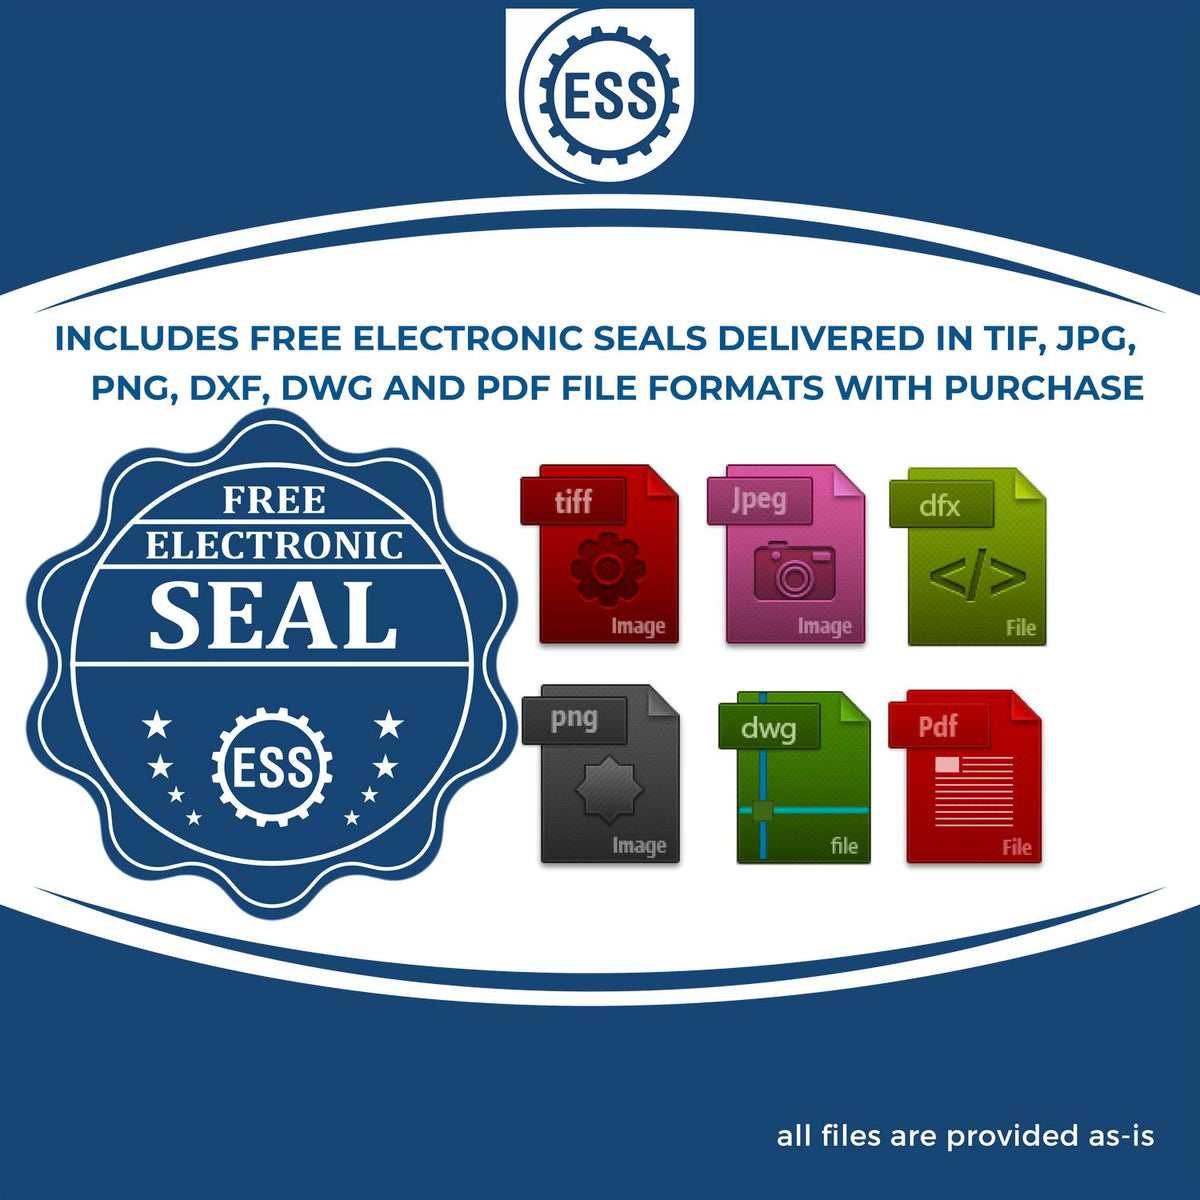 An infographic for the free electronic seal for the Heavy Duty Cast Iron New Mexico Architect Embosser illustrating the different file type icons such as DXF, DWG, TIF, JPG and PNG.